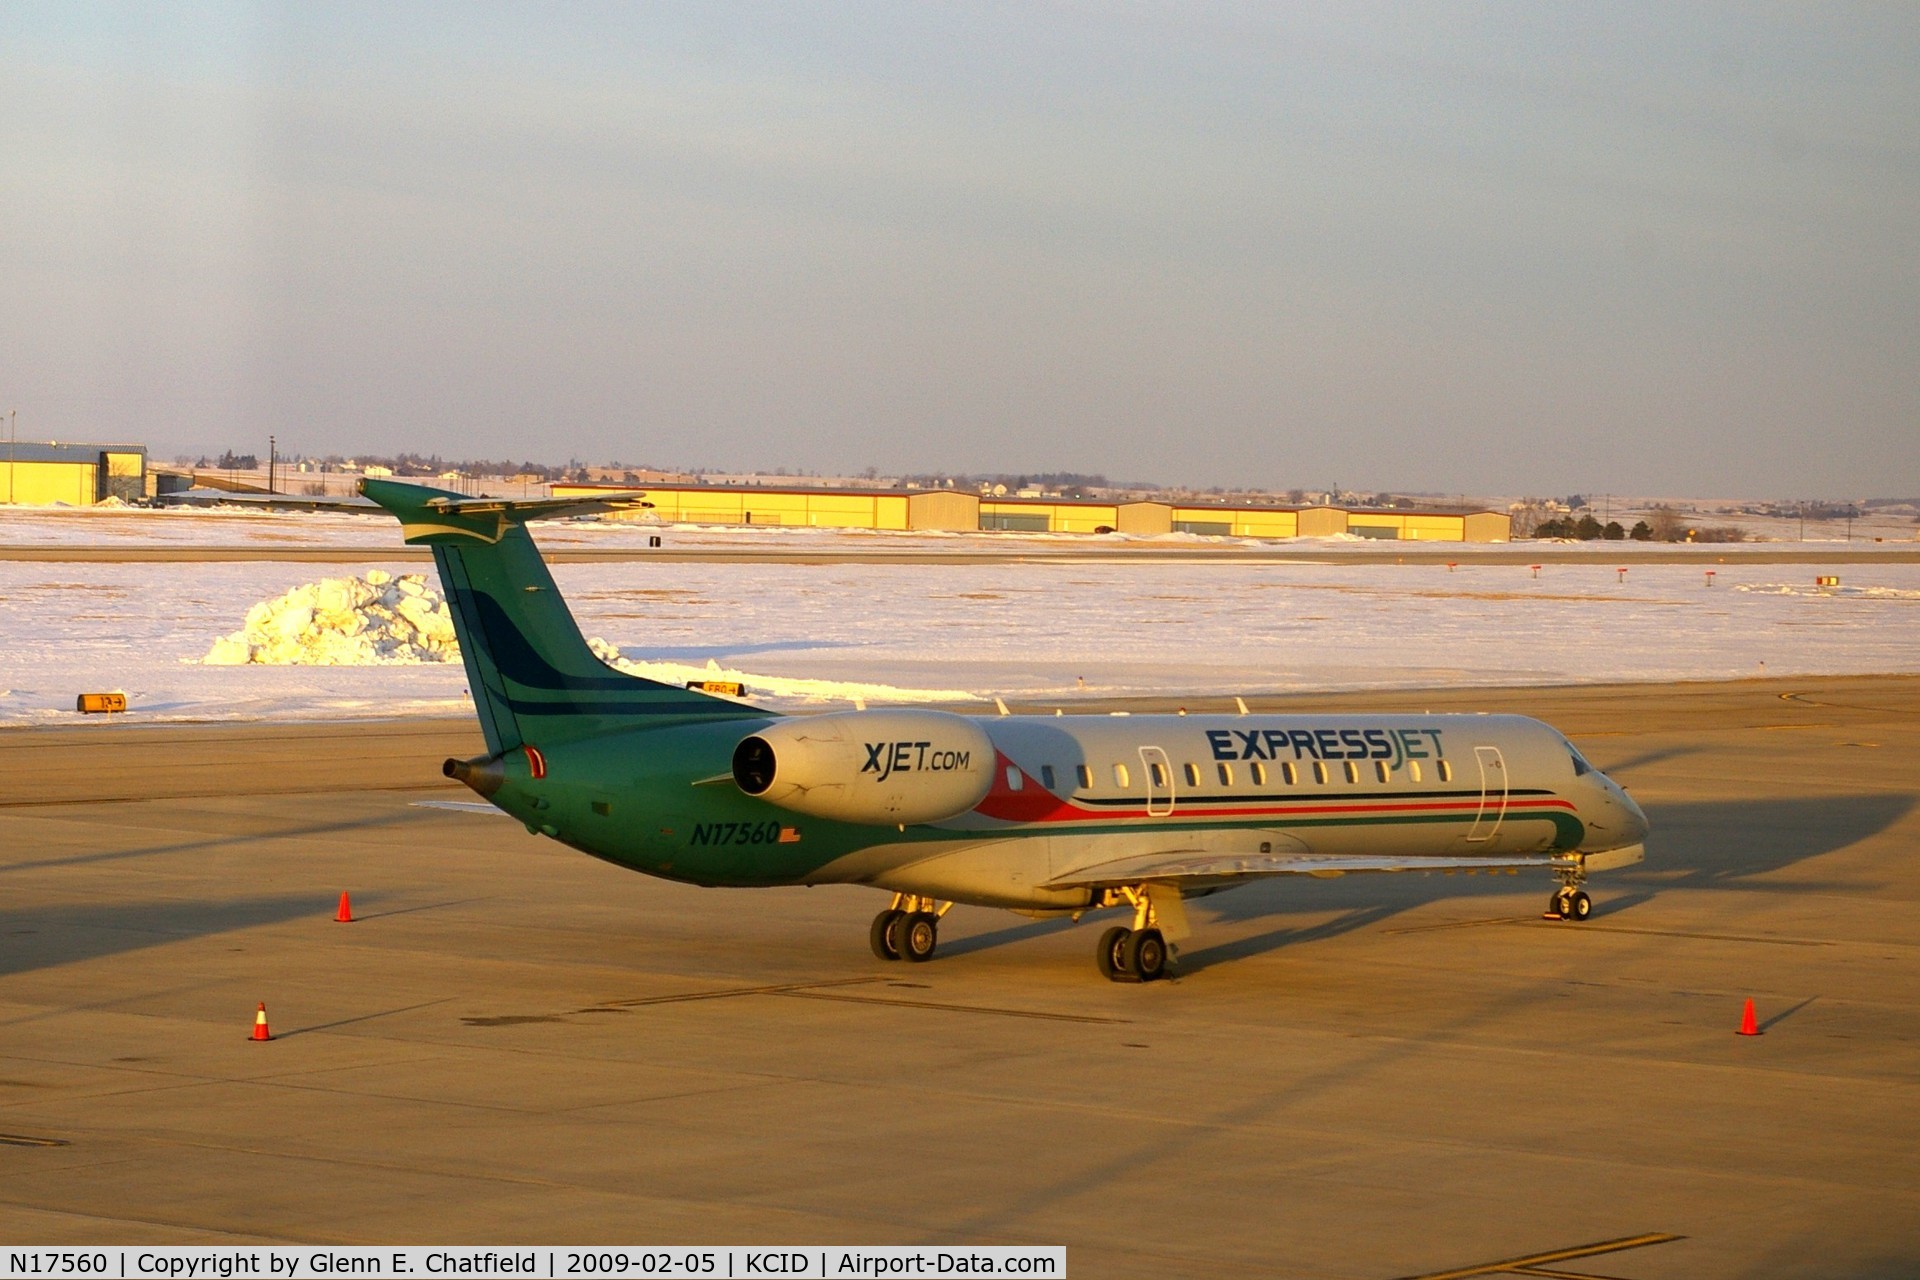 N17560, 2002 Embraer EMB-145LR C/N 145605, Parked on the Landmark Ramp, as seen from my office in the tower.